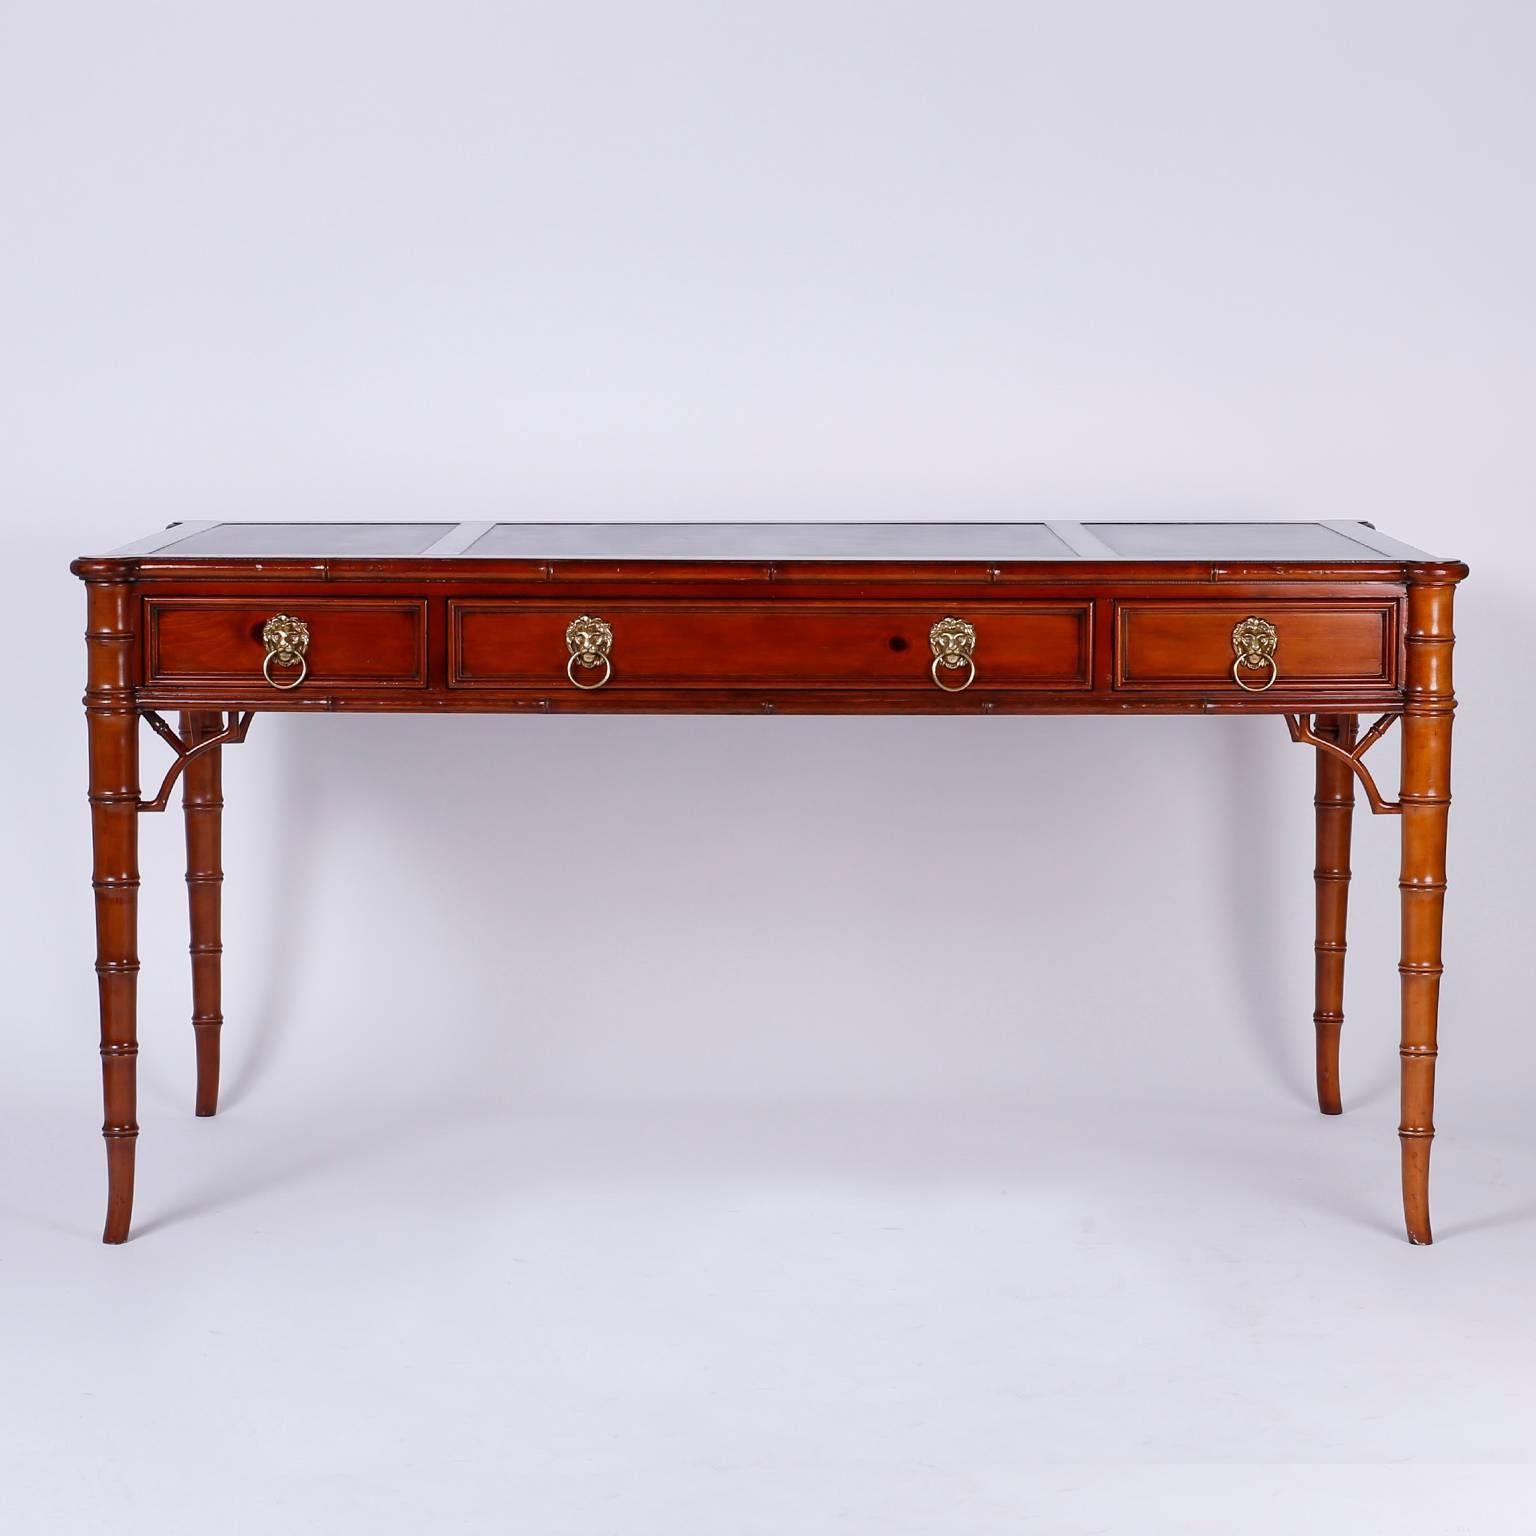 Leather top pine desk or writing table having Chippendale and regency
influences combined with a modern simplicity. The top has three green
leather panels on a three drawer case with lion head pulls, all set on
elegant carved faux bamboo legs